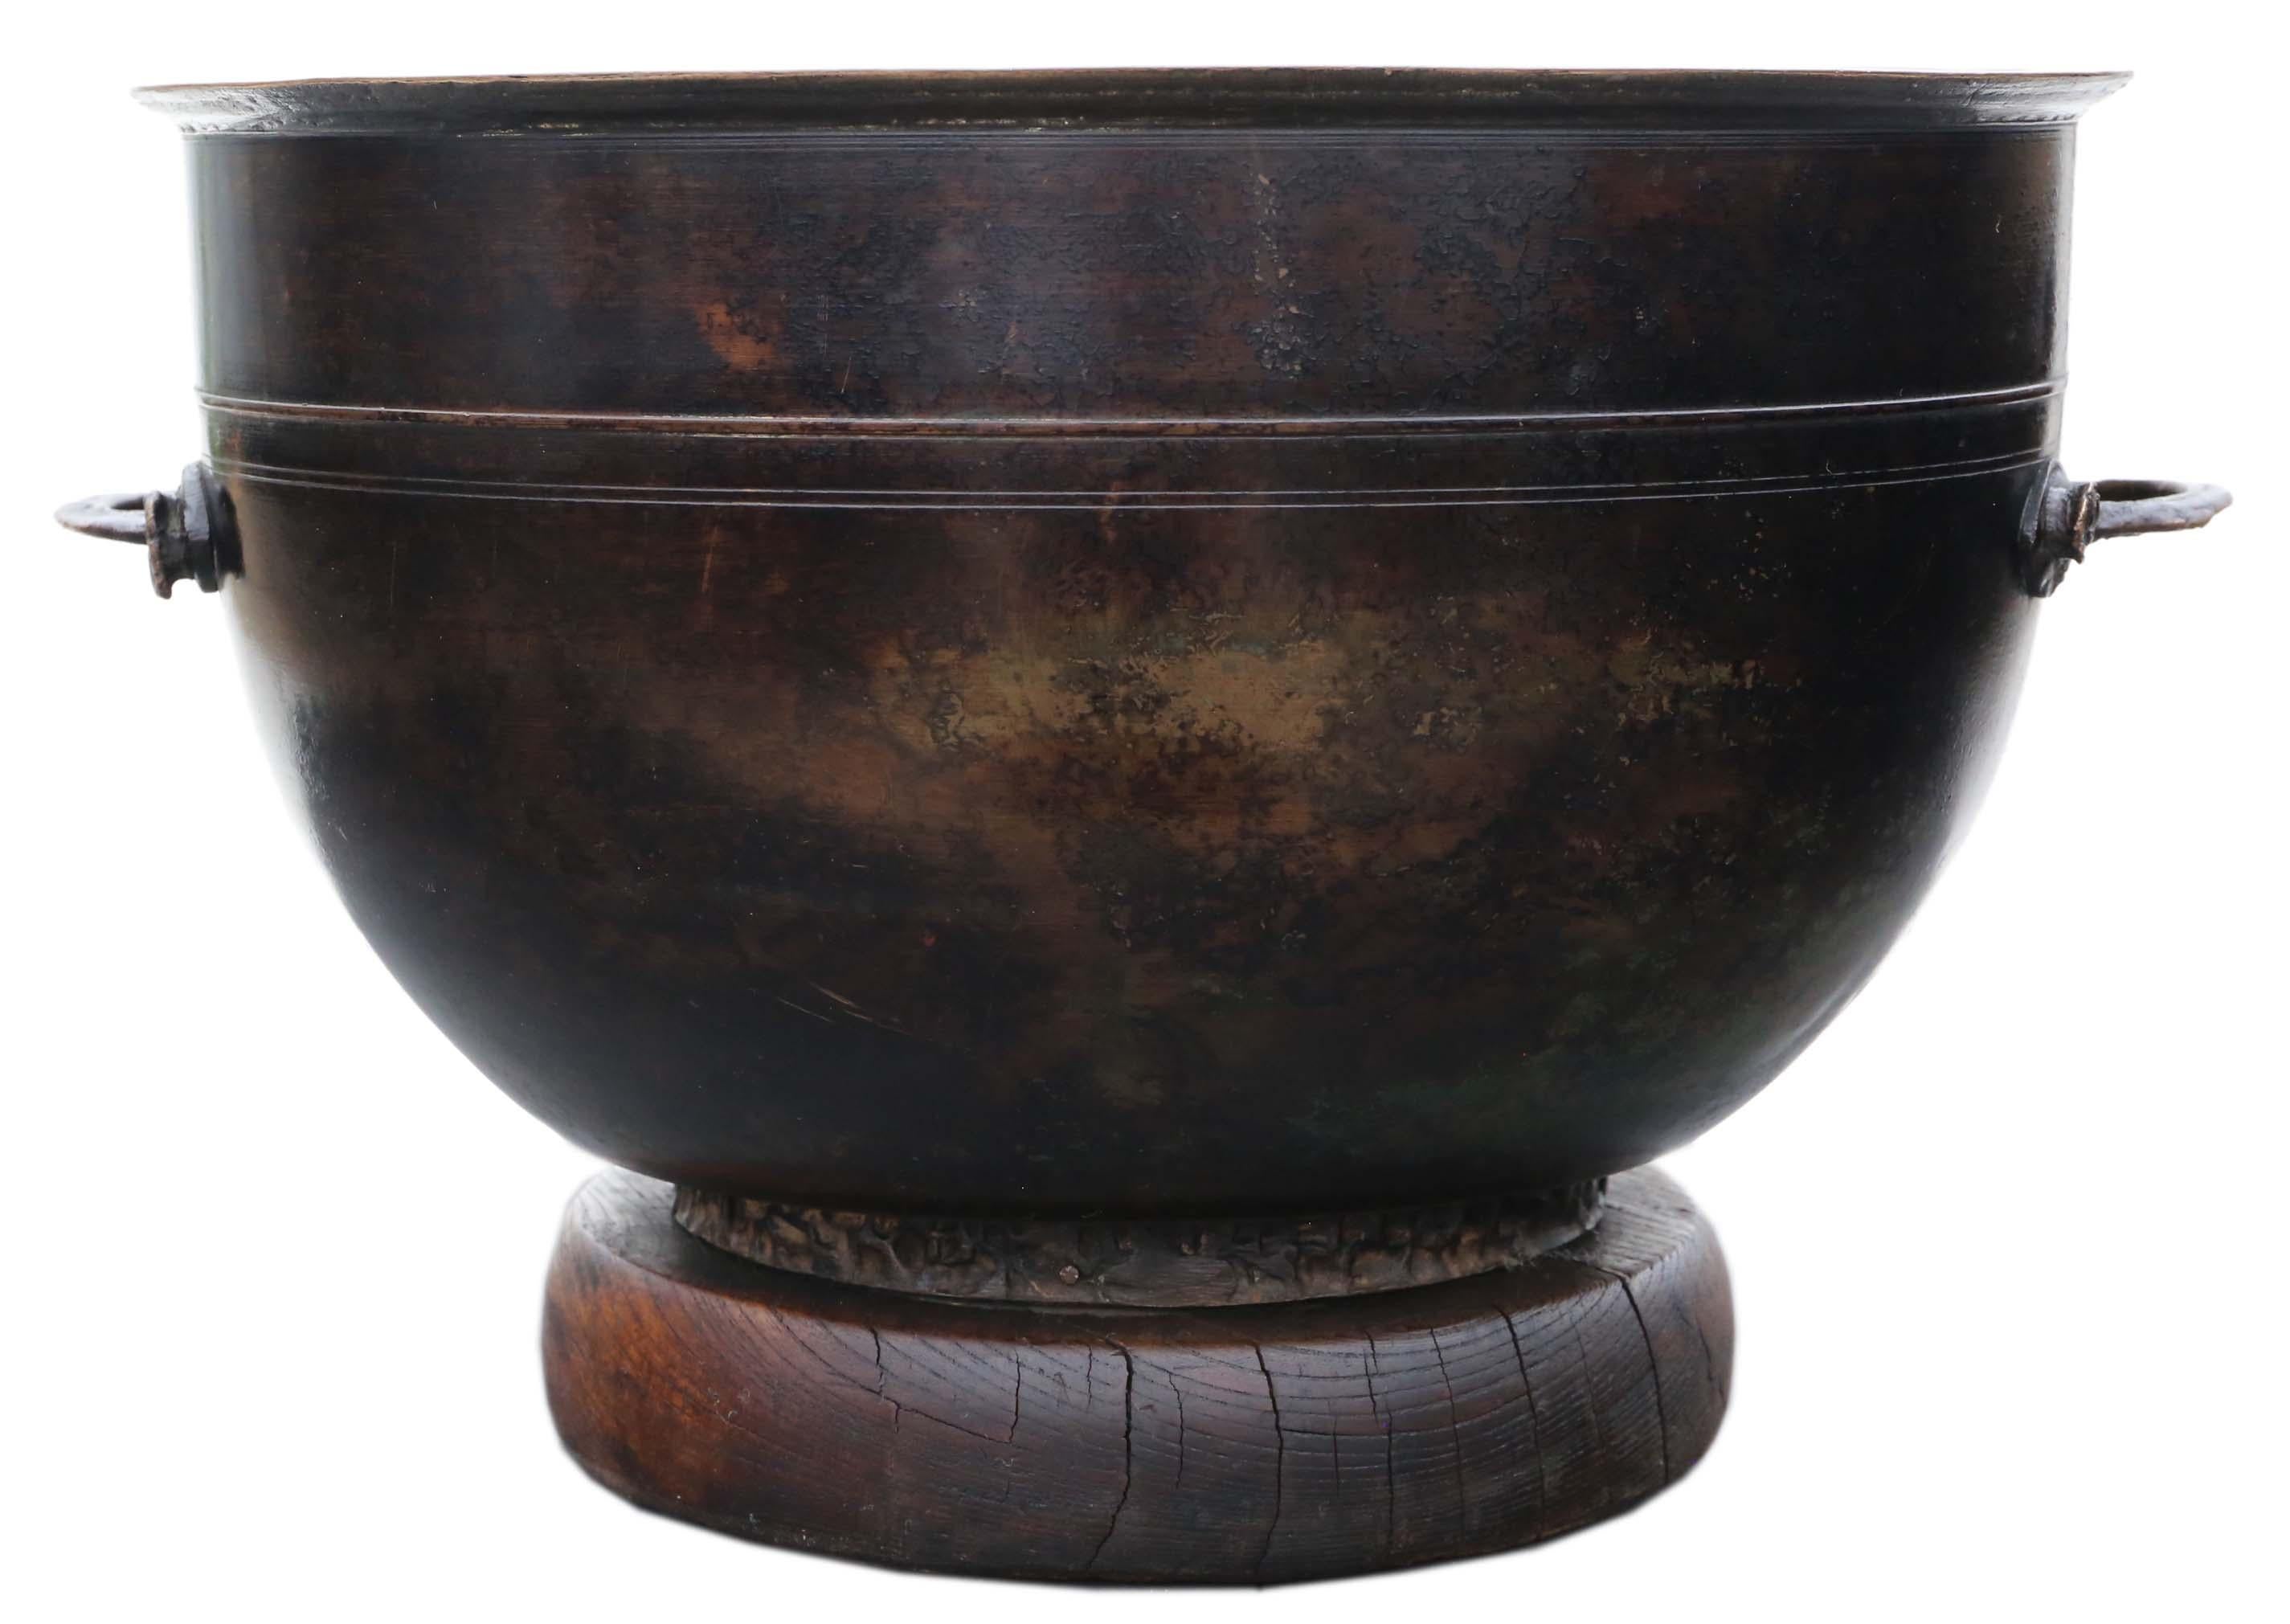 Antique Oriental Japanese large fine quality bronze bowl planter jardinière censor Hibachi brazier C1900 Meiji. Is well suited for use as a bowl, planter or jardinière. 

Would look amazing in the right location and make a fabulous centre piece.